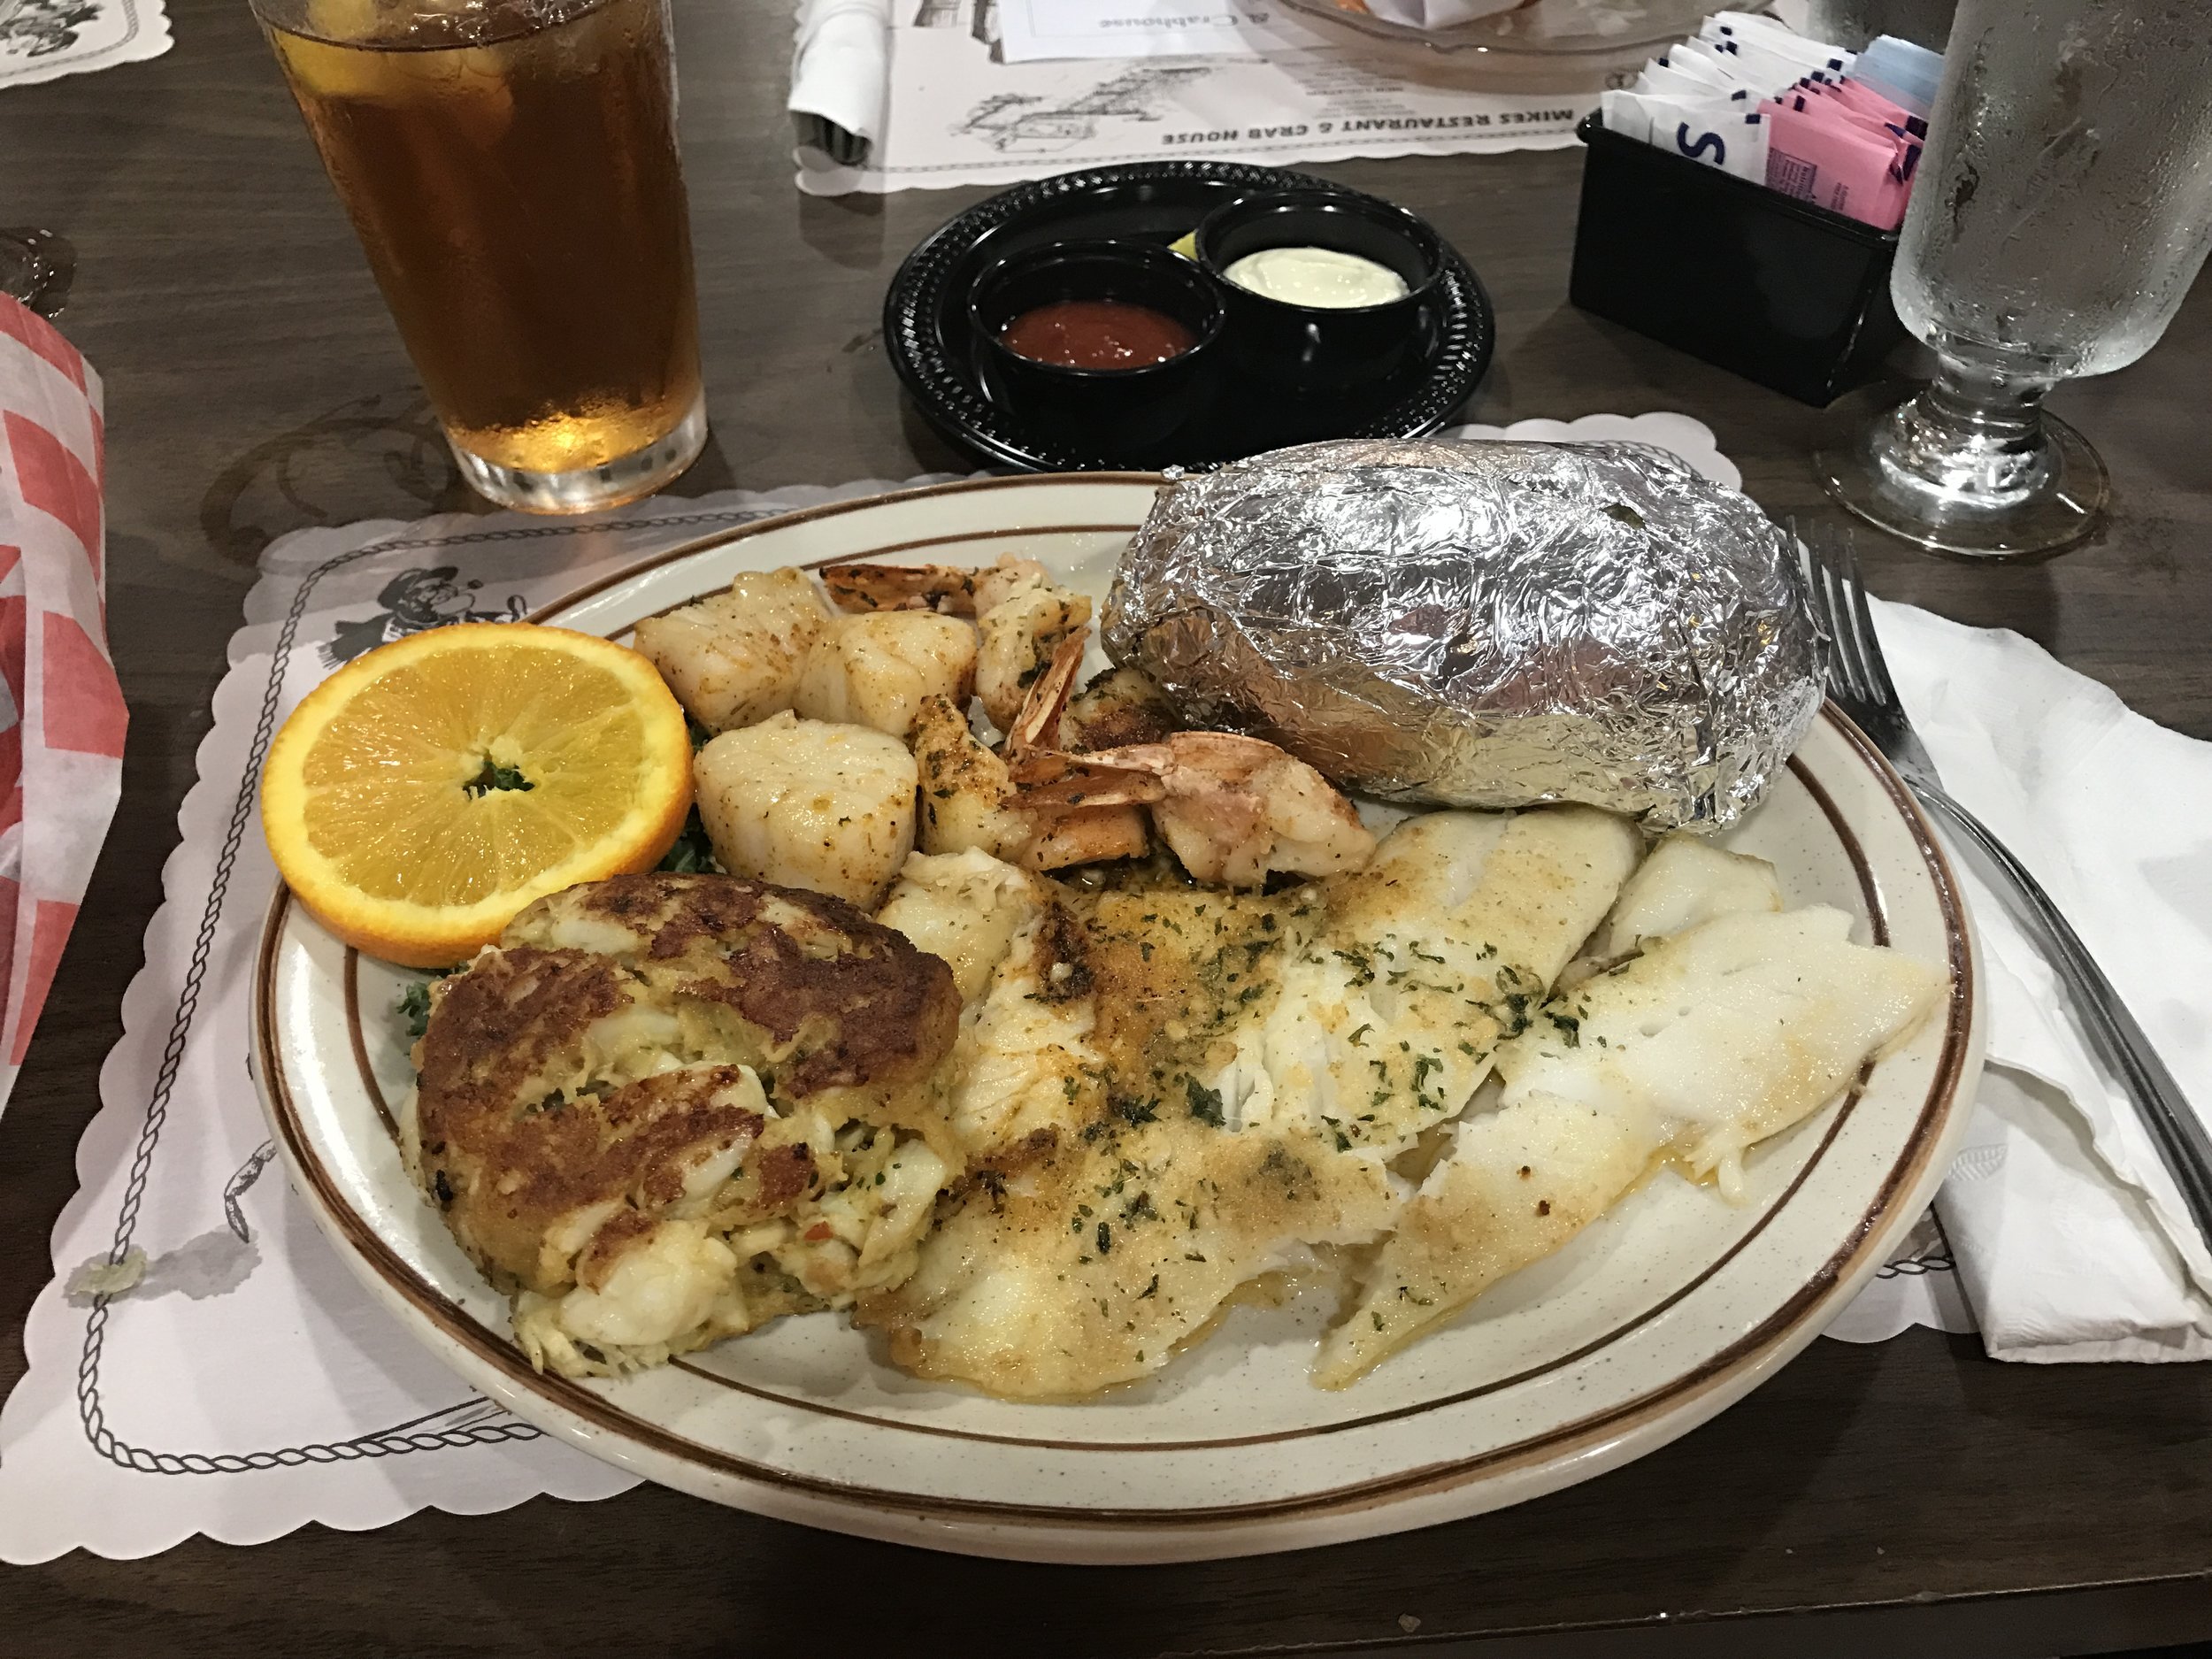 The Seafood Combo